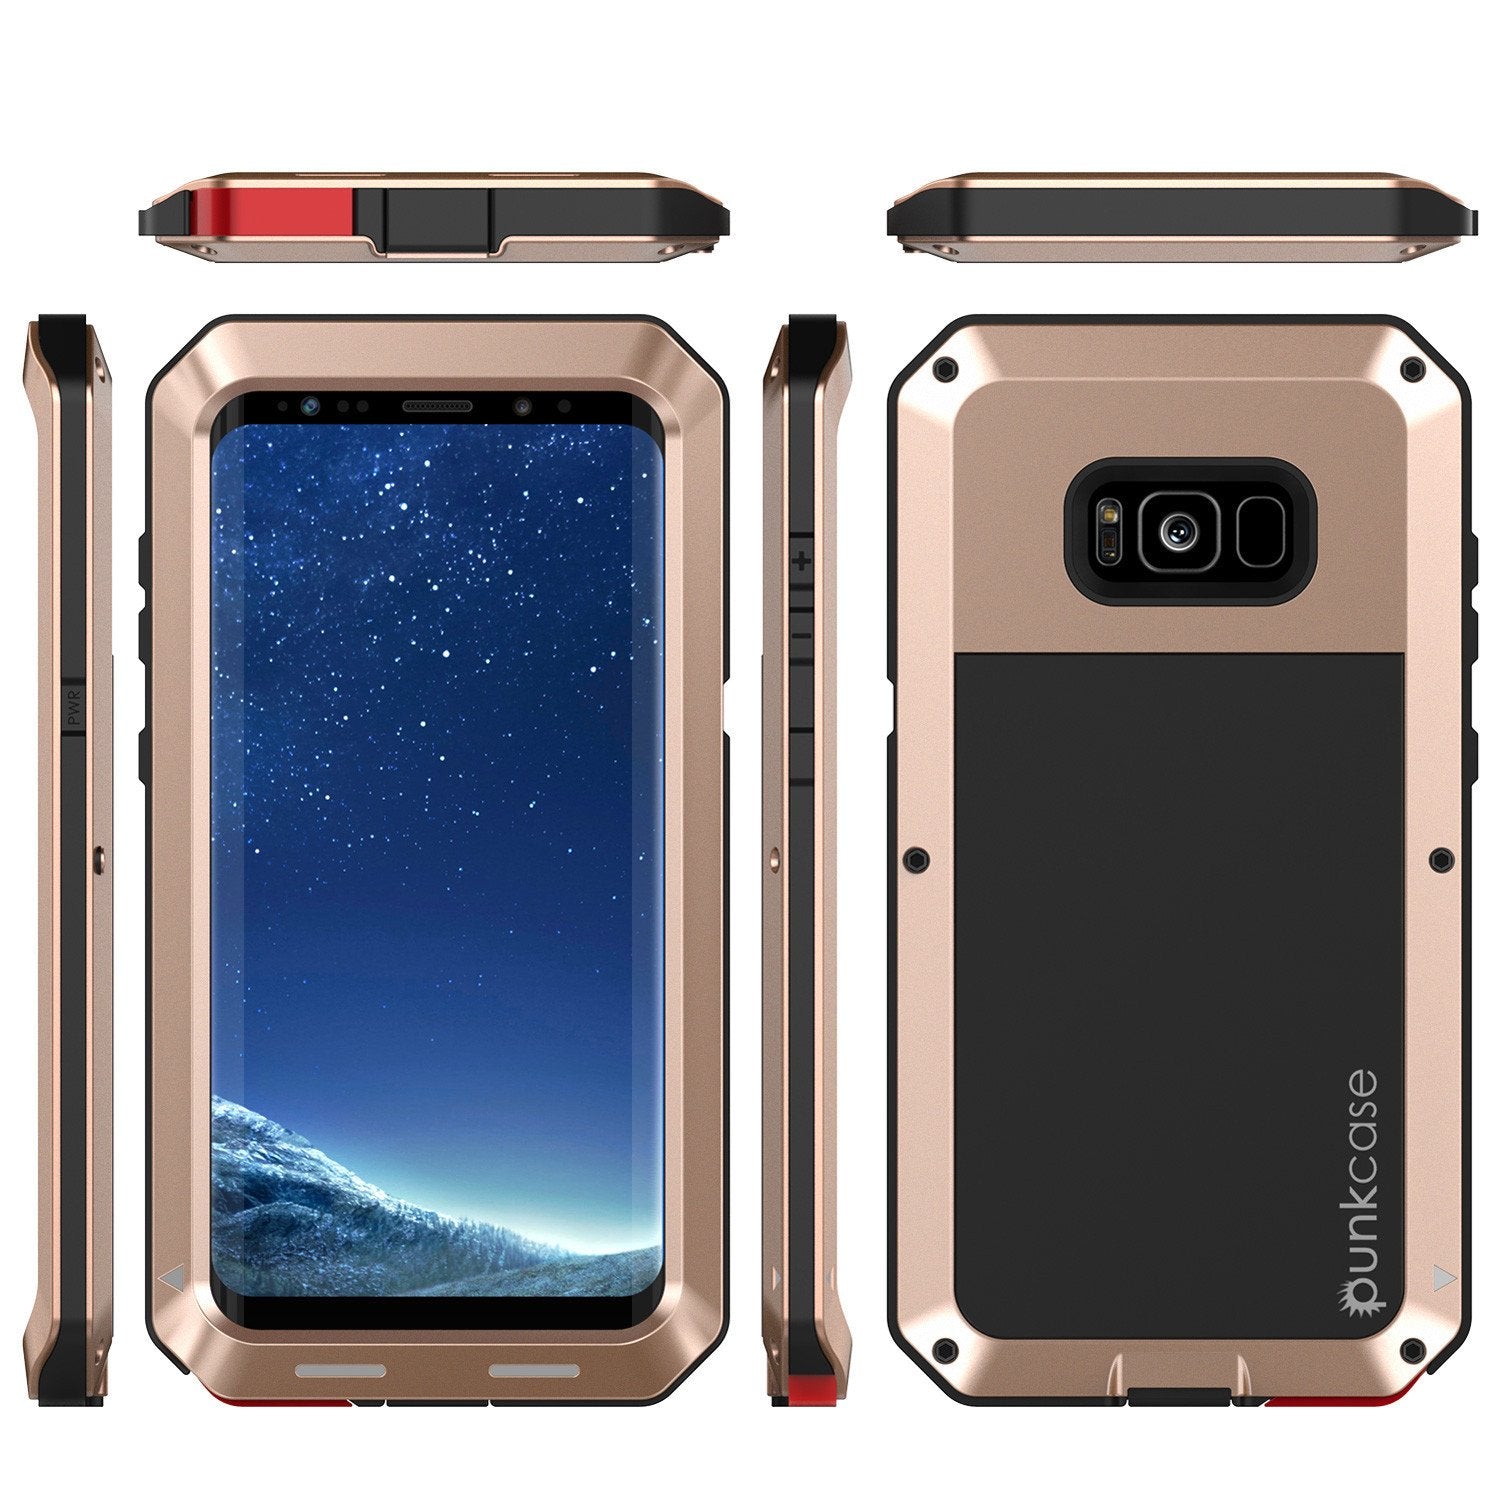 Galaxy S8 Metal Case, Heavy Duty Military Grade Rugged Cover [GOLD]